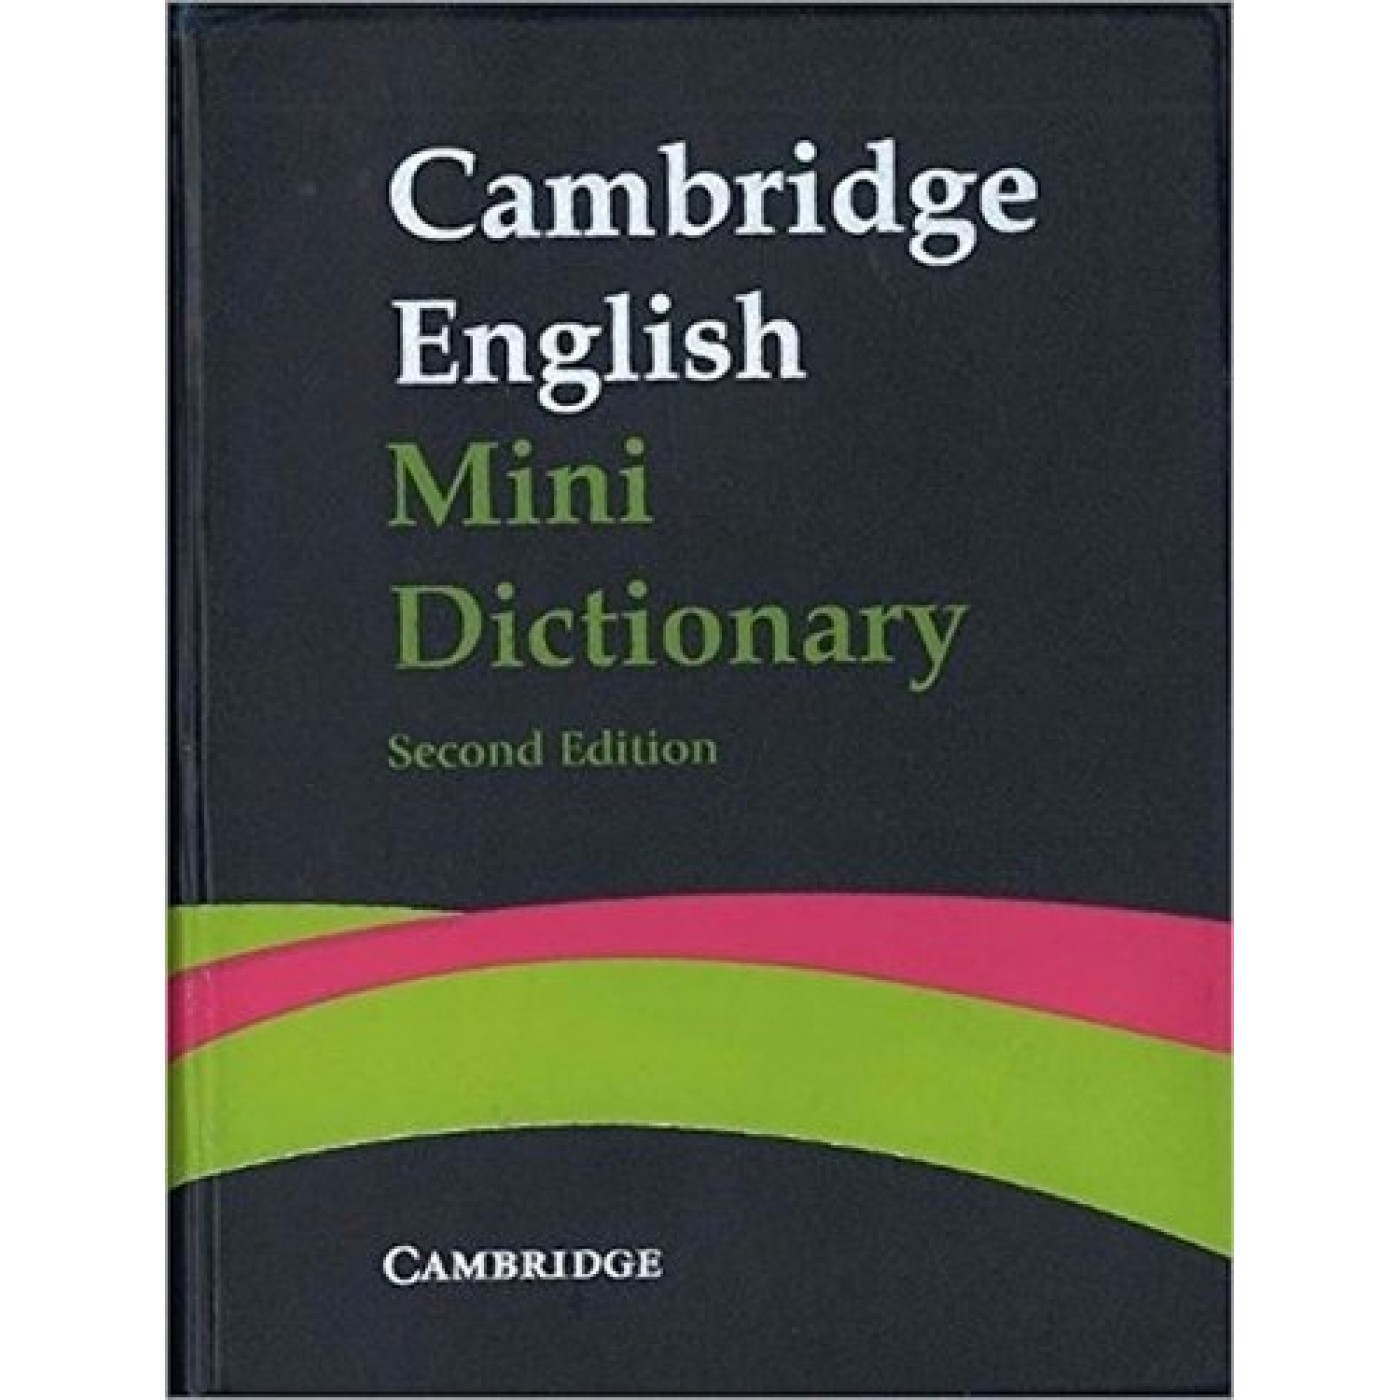 What do dates mean in the cambridge english dictionary?